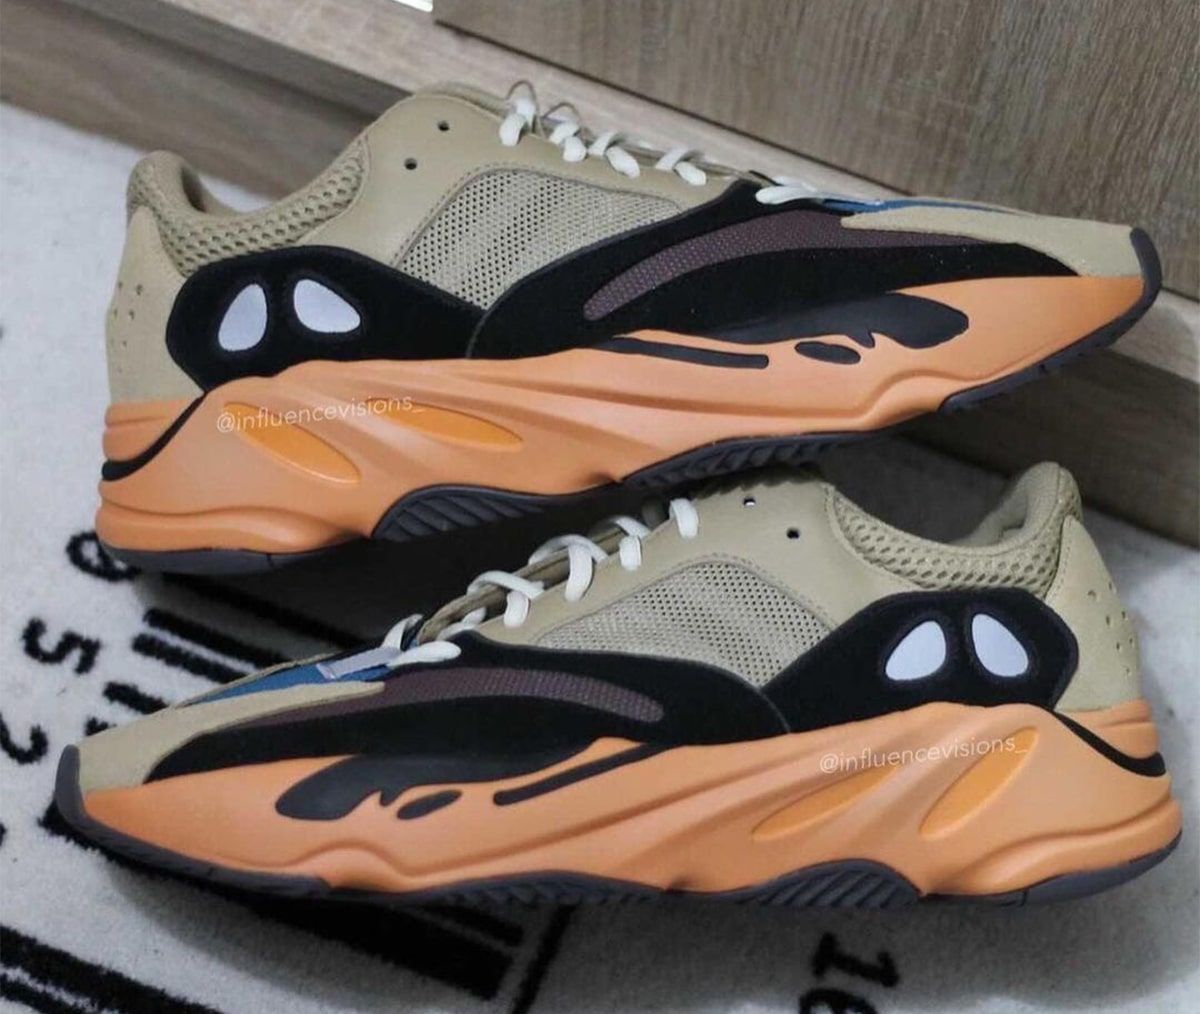 Where to Buy the YEEZY 700 V1 